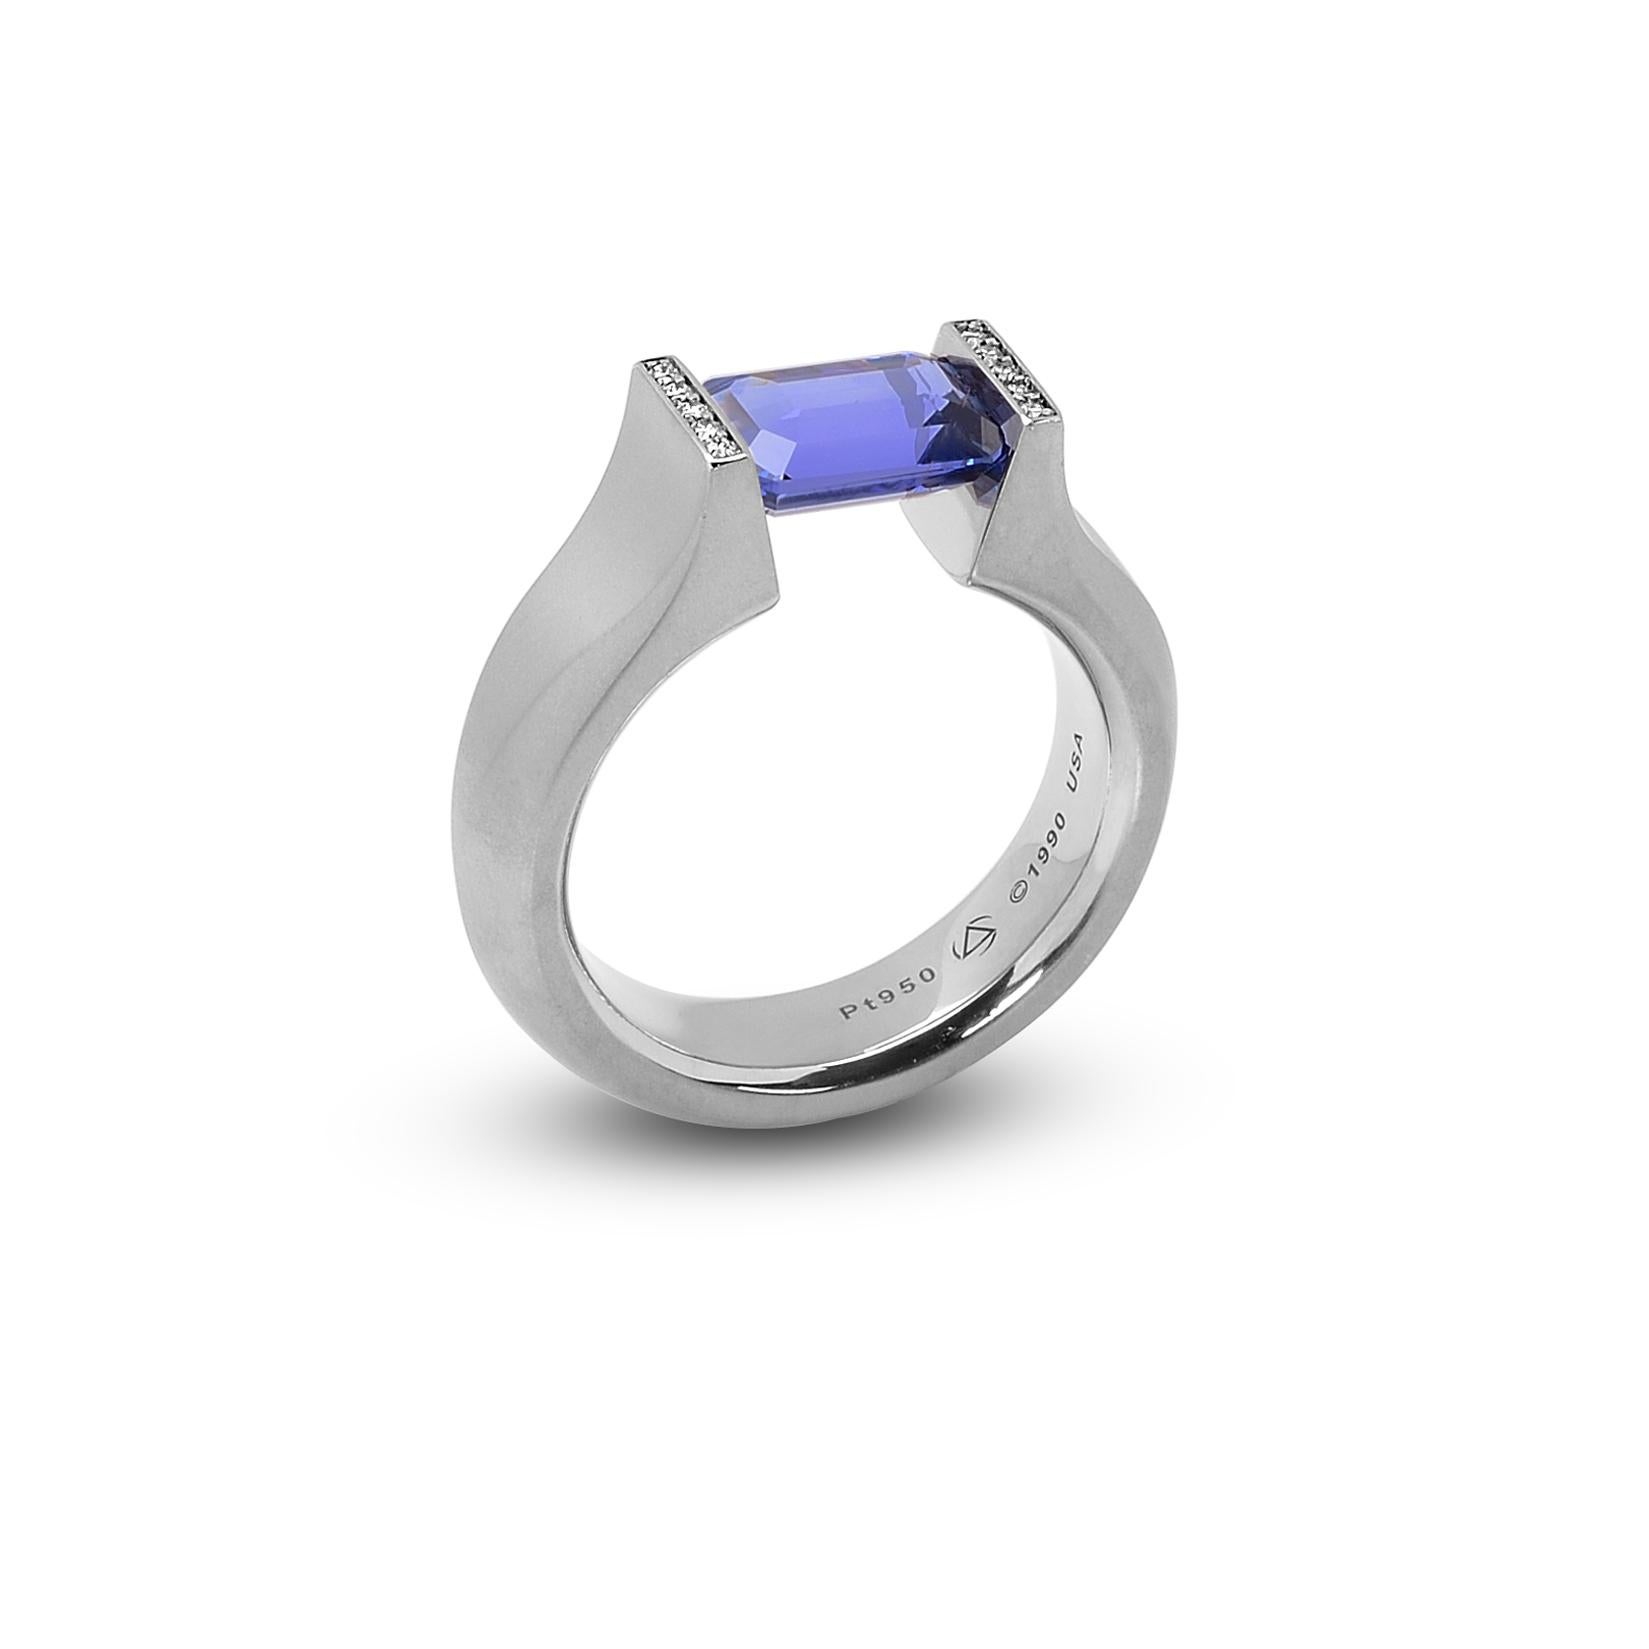 Emerald Cut Steven Kretchmer Platinum SHO Ring with a Tension-Set Blue Sapphire For Sale